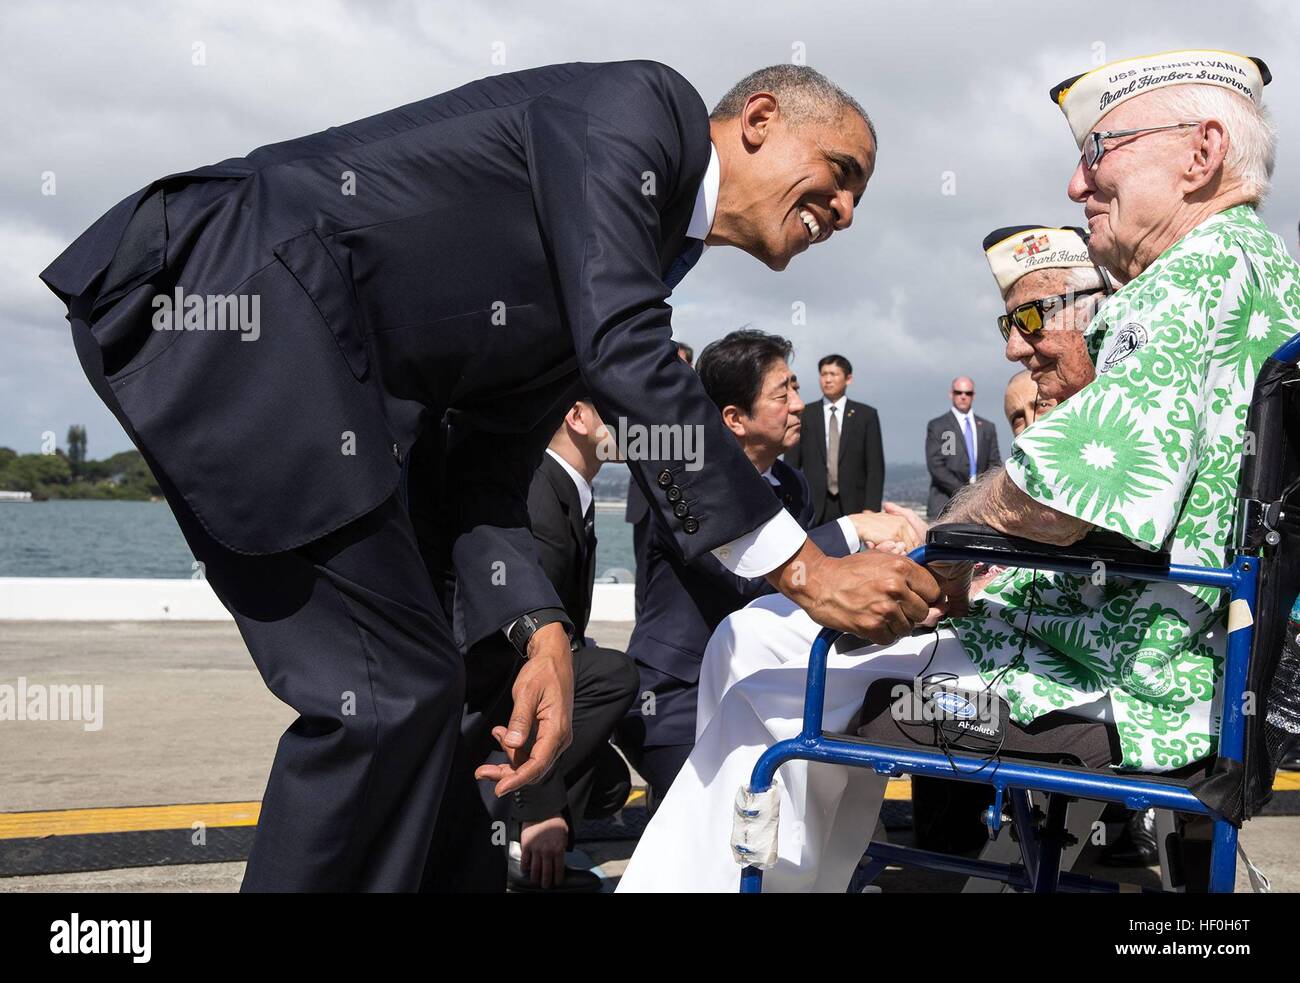 Pearl Harbour, Hawaii. 27th Dec, 2016. U.S President Barack Obama and Japanese Prime Minister Shinzo Abe greet Pearl Harbor survivors from foreground, Everett Hyland, Al Rodrigues, and Sterling Cale following their speeches at the Pearl Harbor Memorial December 27, 2016 in Pearl Harbor, Hawaii. Abe is the first Japanese leader to publicly view the site of the Pearl Harbor Attack. Credit: Planetpix/Alamy Live News Stock Photo